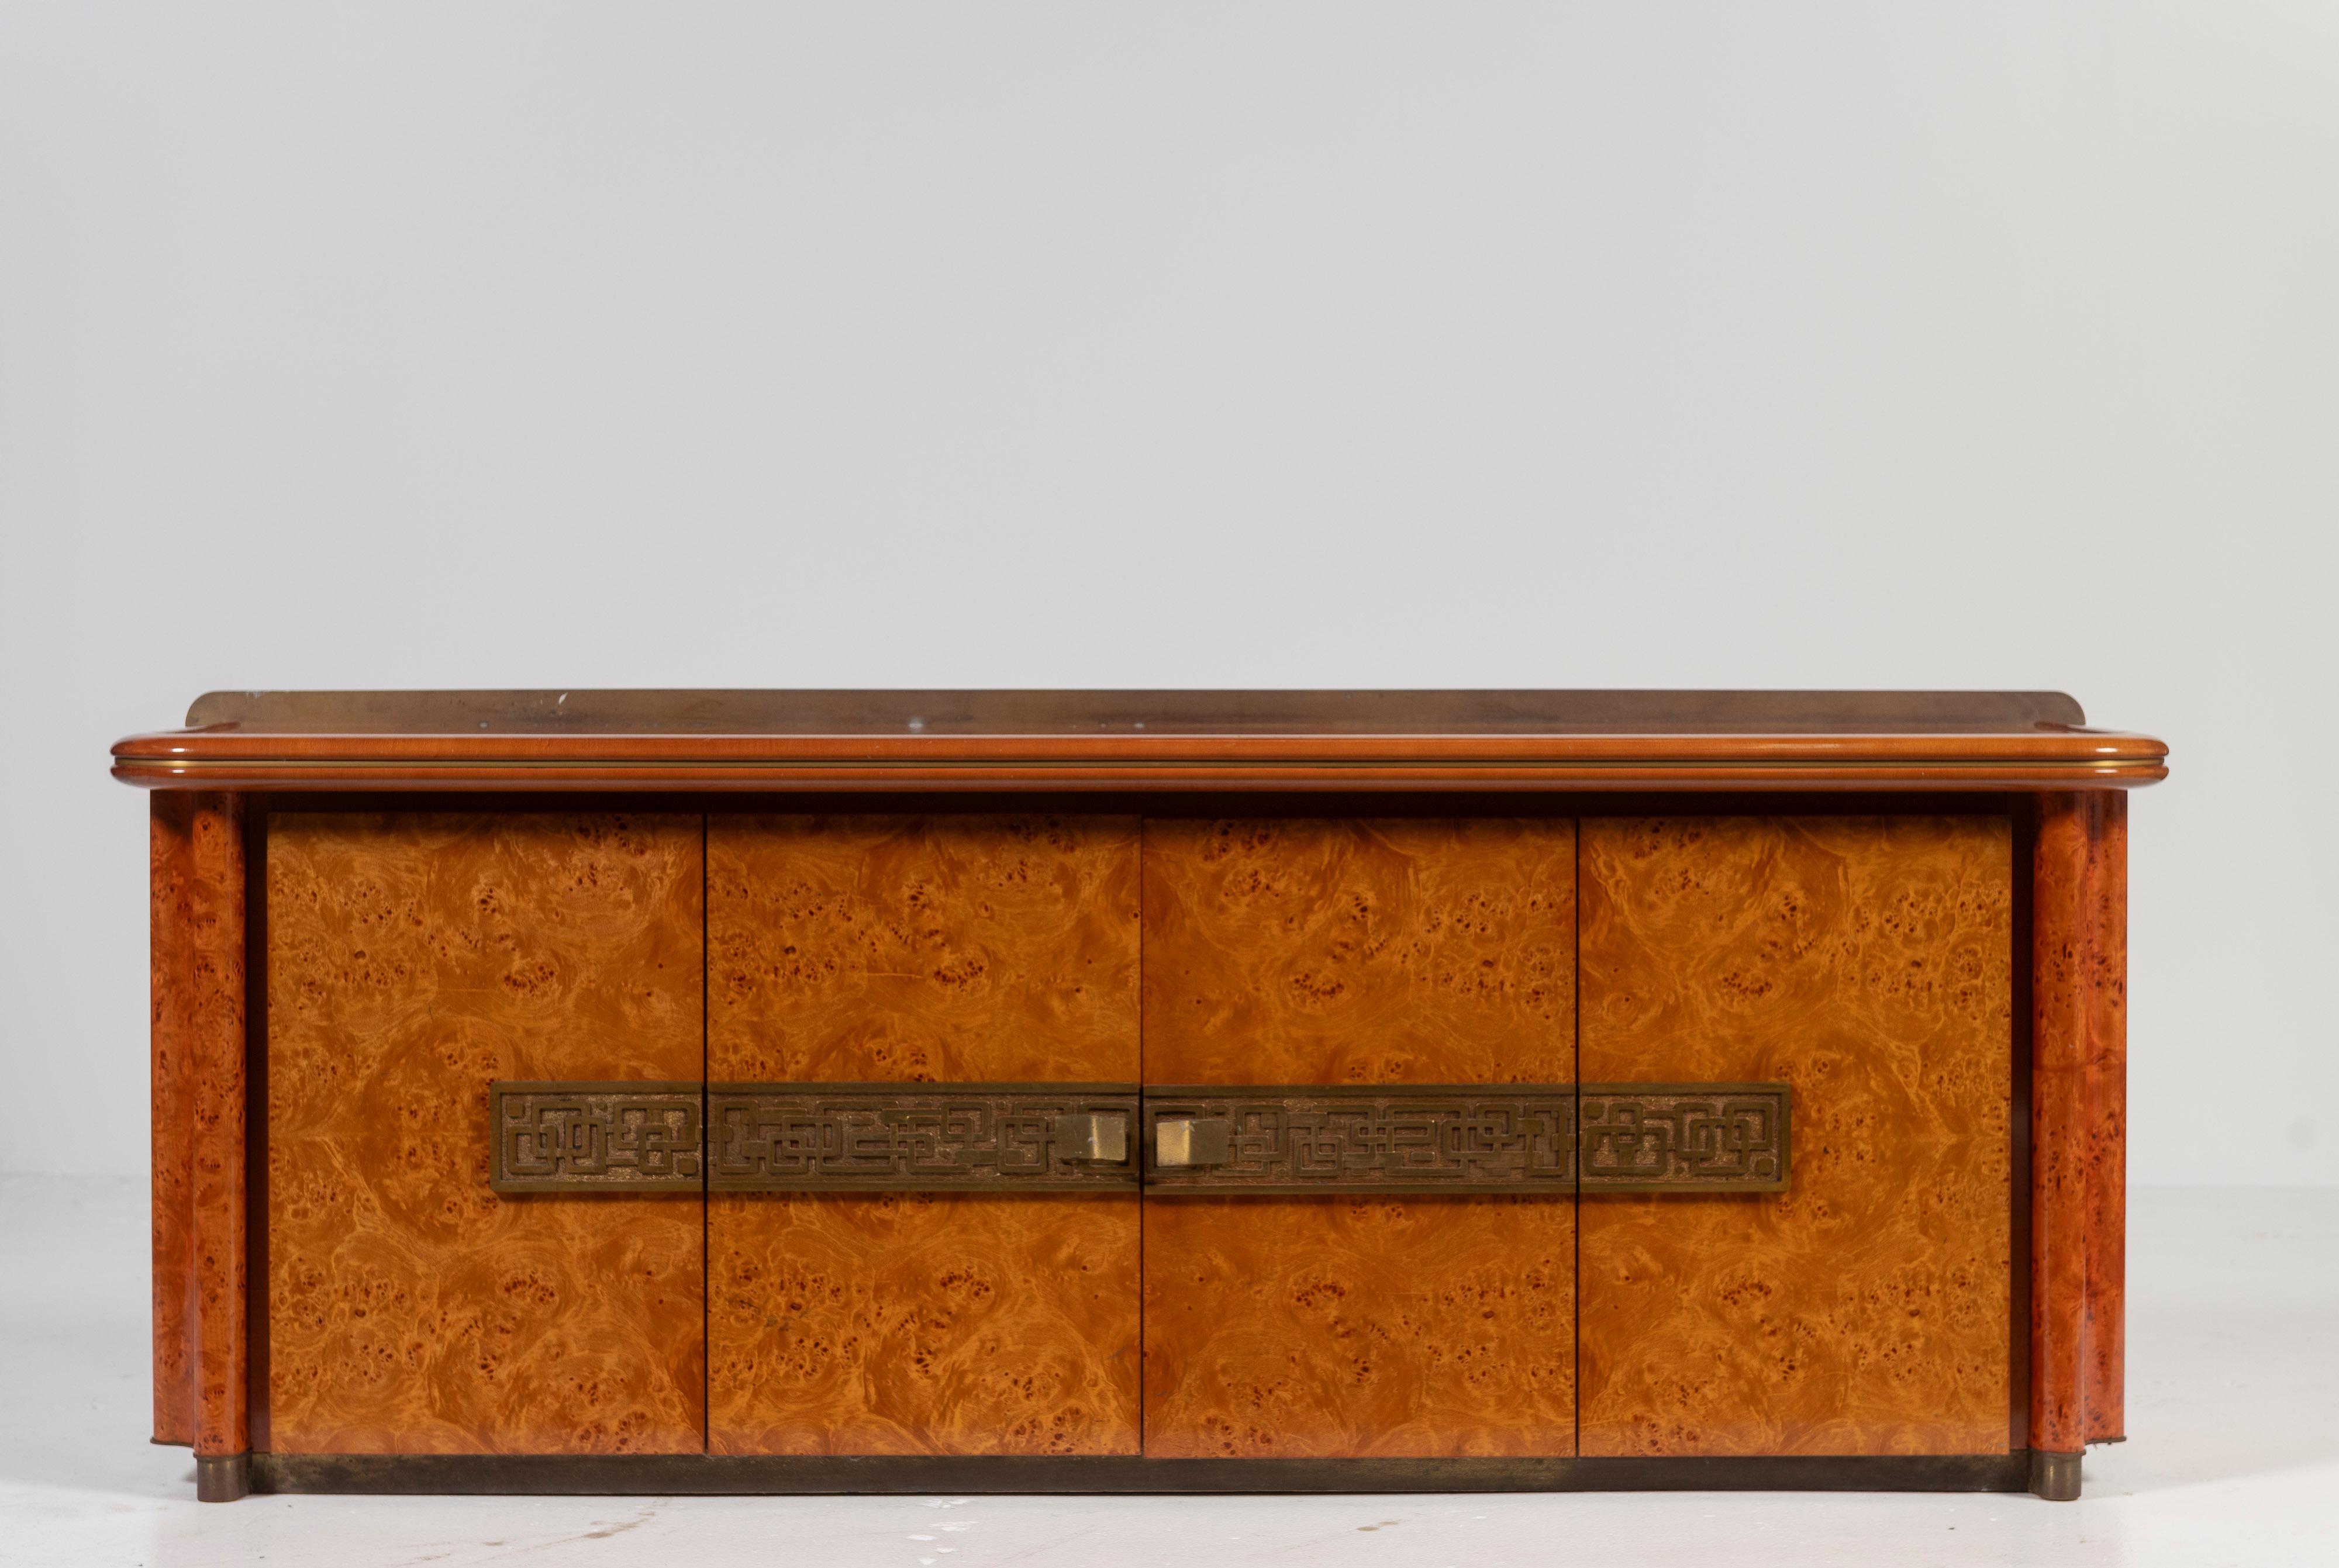 Solid burl, brass and bronze vintage cabinet, by Italian Luciano Frigerio, can serve as a cabinet, buffet, dresser or sideboard. Beautifully designed with curved edges and intricate metal accents, the doors open to reveal the four drawers and two